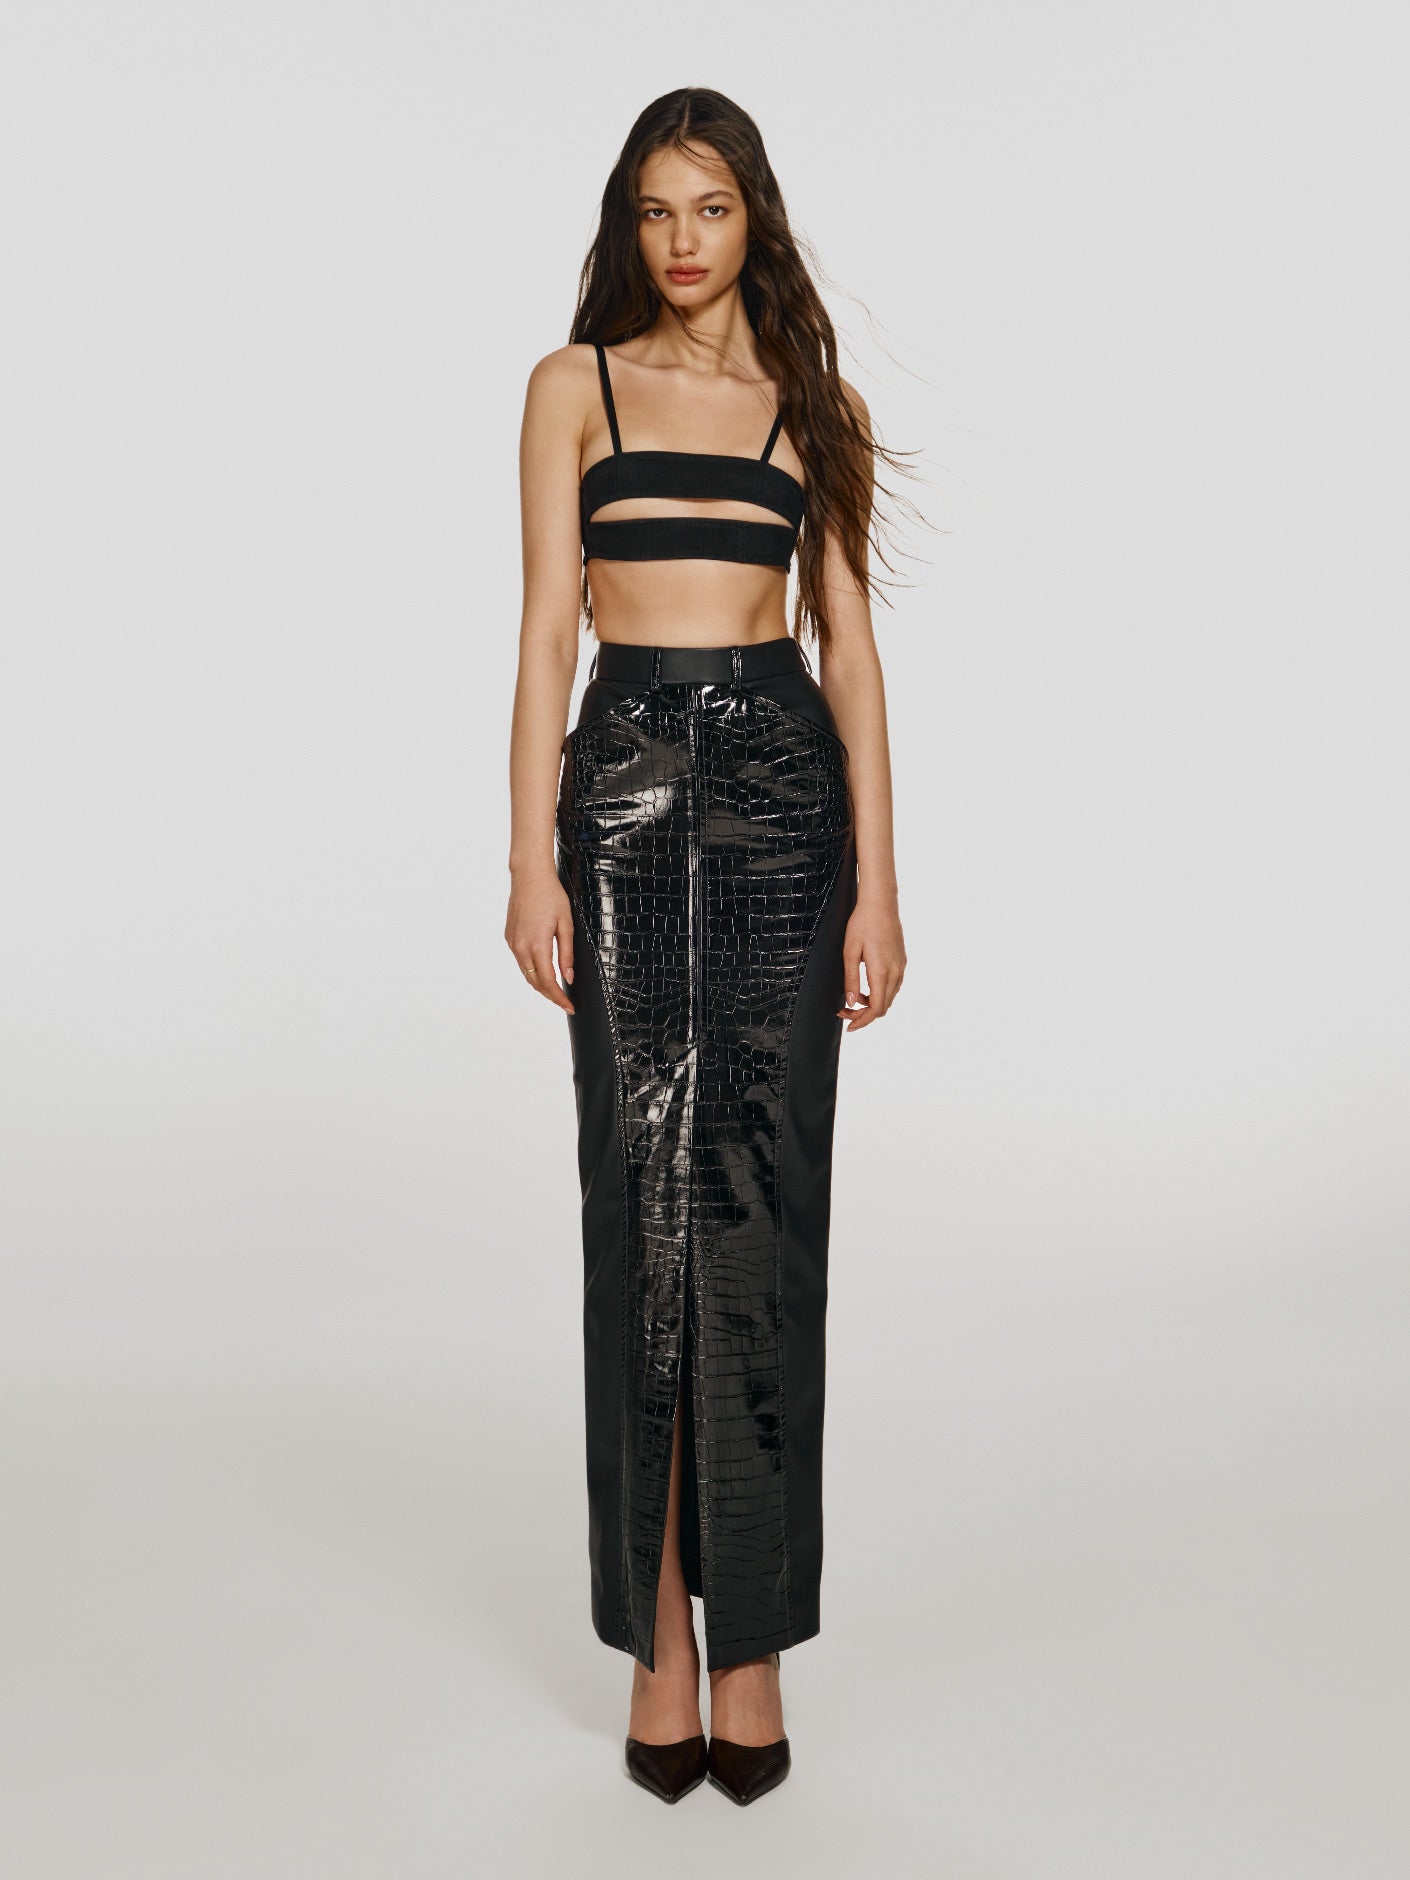 Full shot of a girl in a black mesh crop top with horizontal cut and a black vegan leather maxi skirt with a crocodile print and a slit in the center